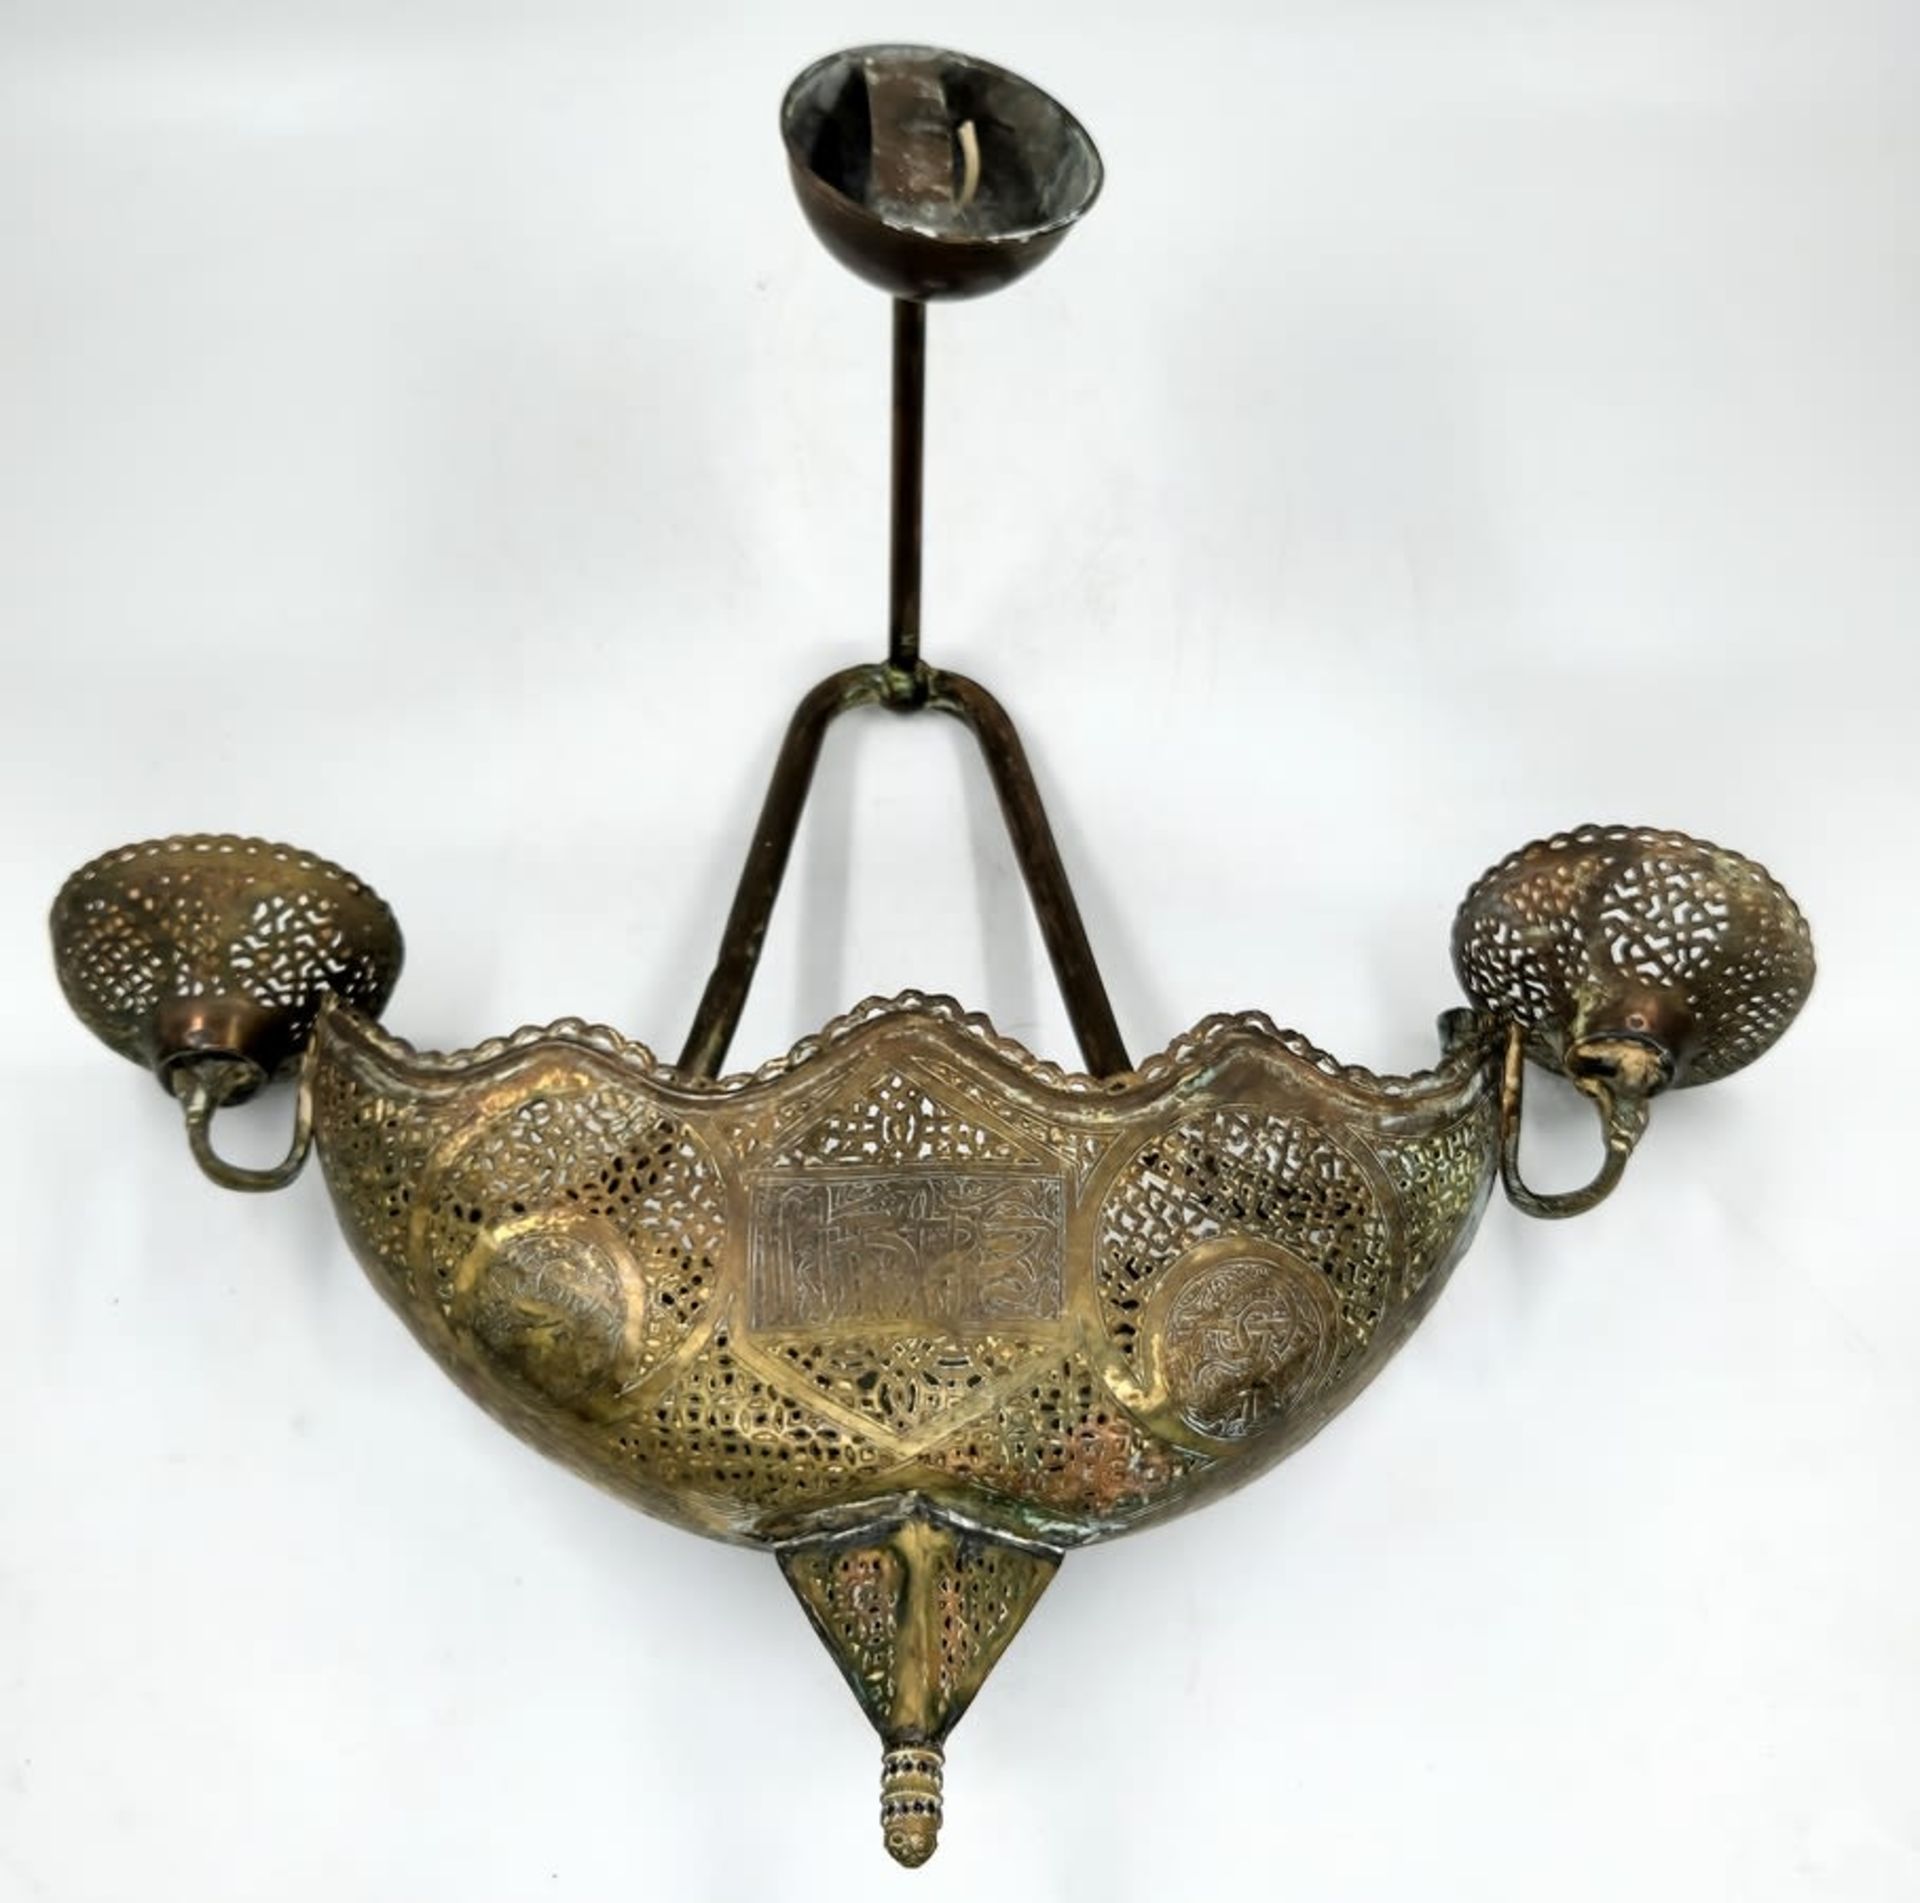 A Syrian side lamp, 19th century, made of sawn and engraved brass, handmade, arabesque decorations - Bild 2 aus 3